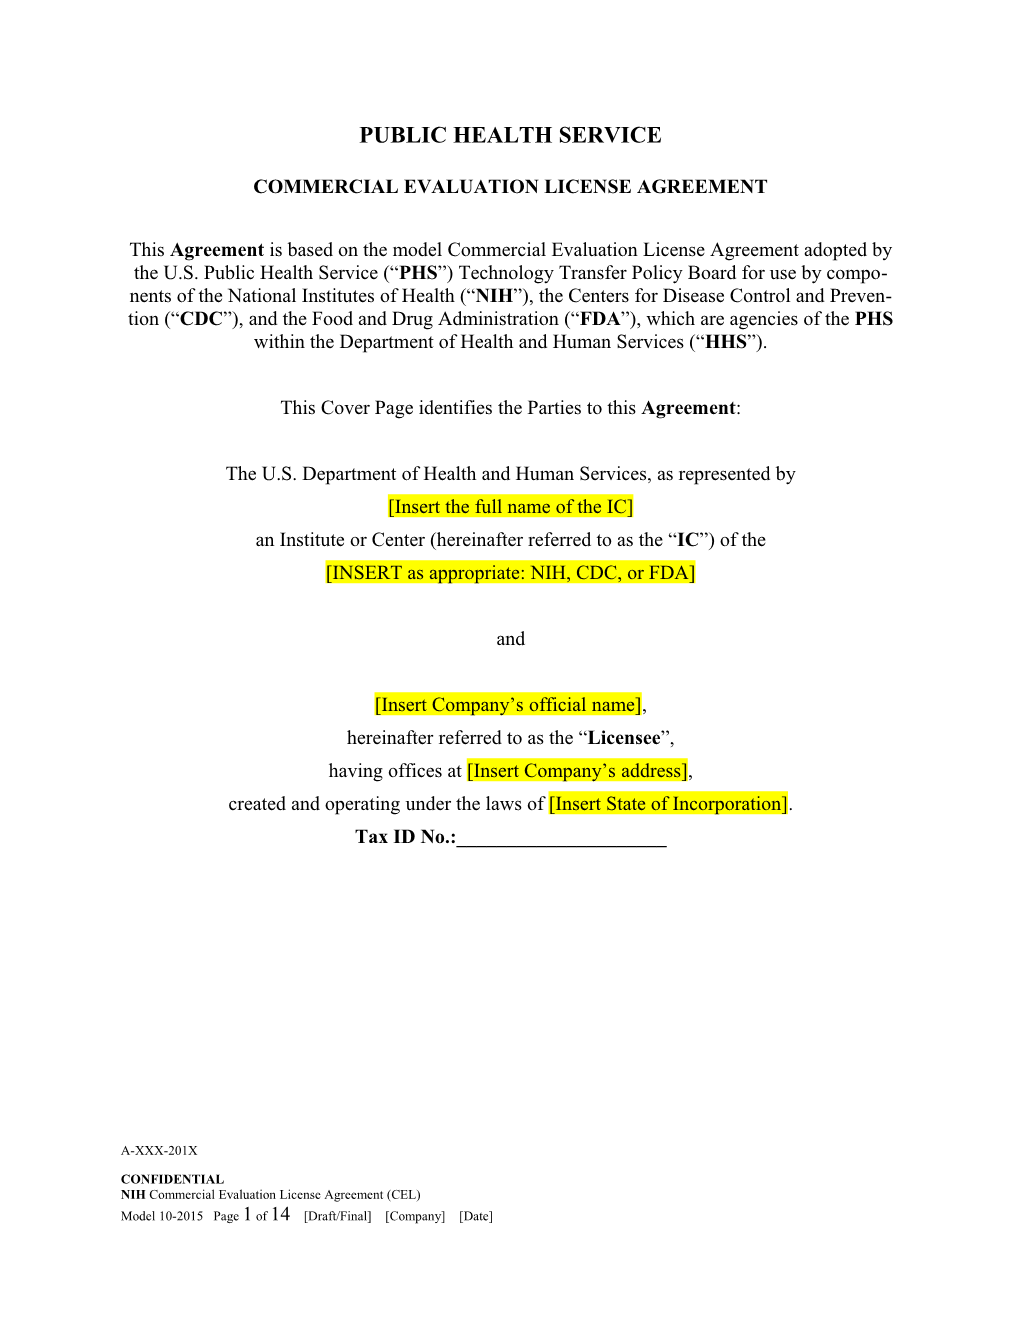 Commercial Evaluation License Agreement